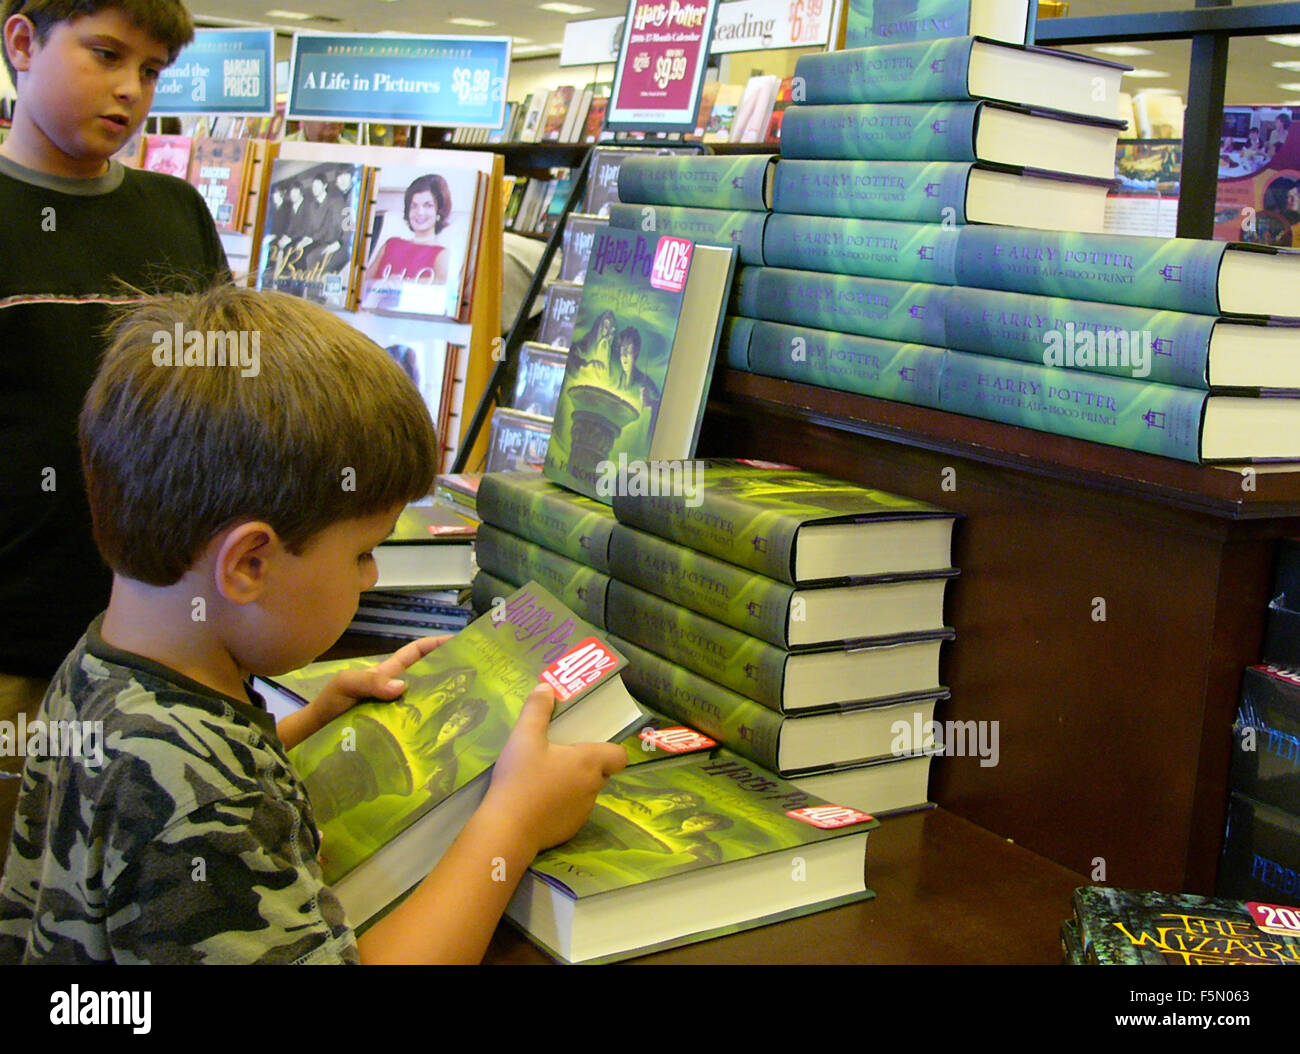 Jul 16, 2005; Aliso Viejo, CA, USA; JK Rowling the writer from Scotland releases her latest book 'Harry Potter and the Half-Blood Prince'. A young shopper grabs his copy in Barnes and Noble bookstore, Aliso Viejo, California. After being the fastest moving book in history in the UK market by selling at 24 copies a second, the latest book in the Harry Potter fantasy series, sold 6.9 million copies in its first day in the United States. Mandatory Credit: Photo by Ruaridh Stewart/ZUMA Press. (©) Copyright 2005 by Ruaridh Stewart Stock Photo